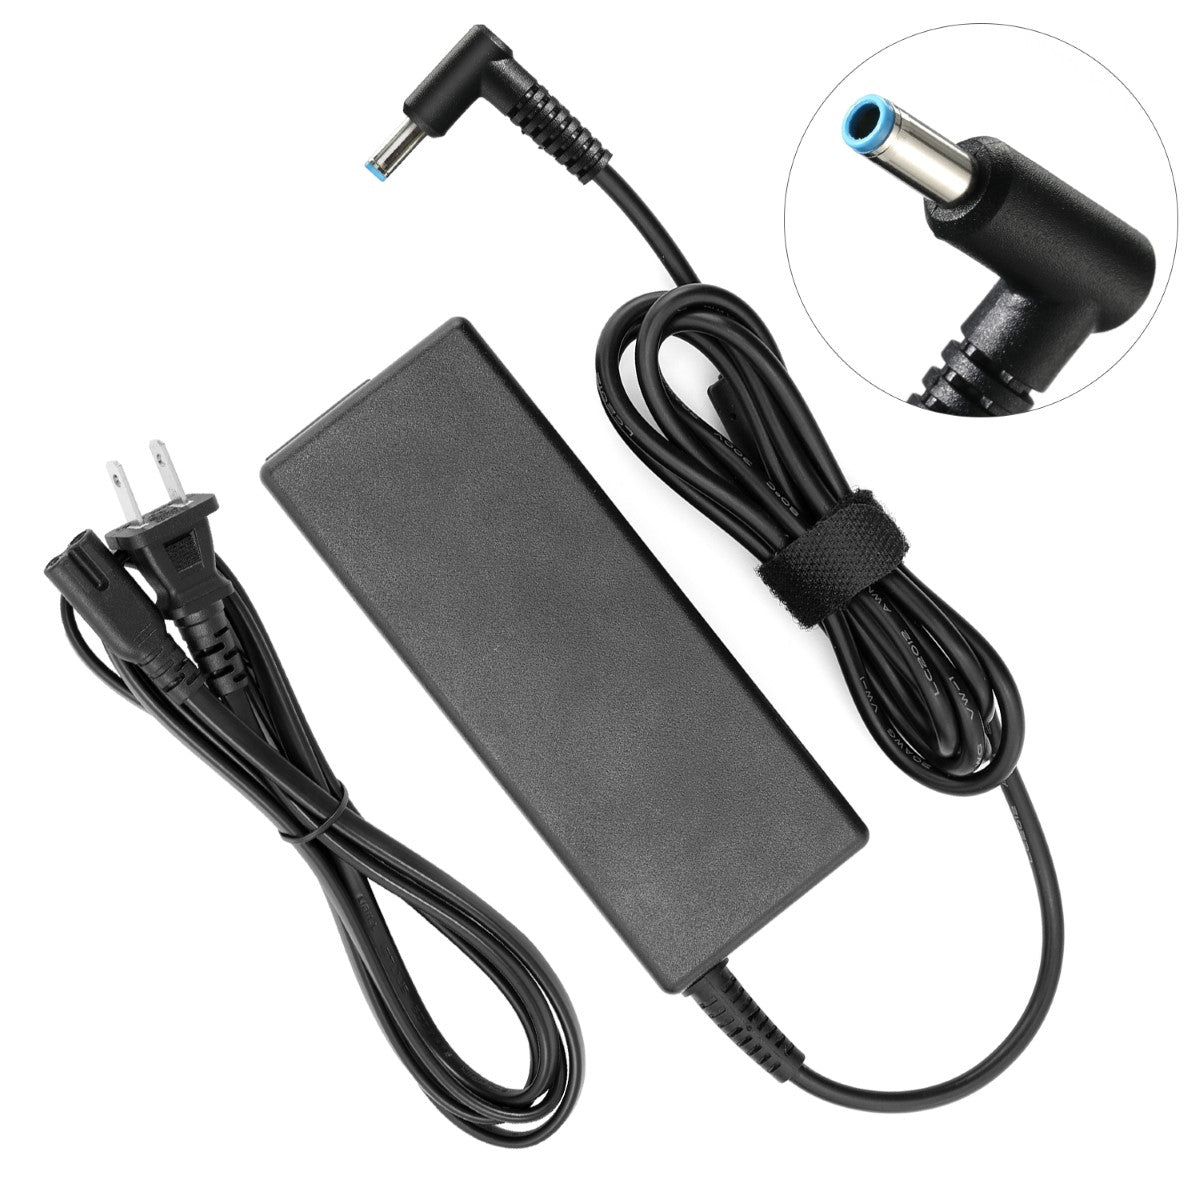 AC Adapter Charger for HP Envy TouchSmart 15-j040us Notebook.